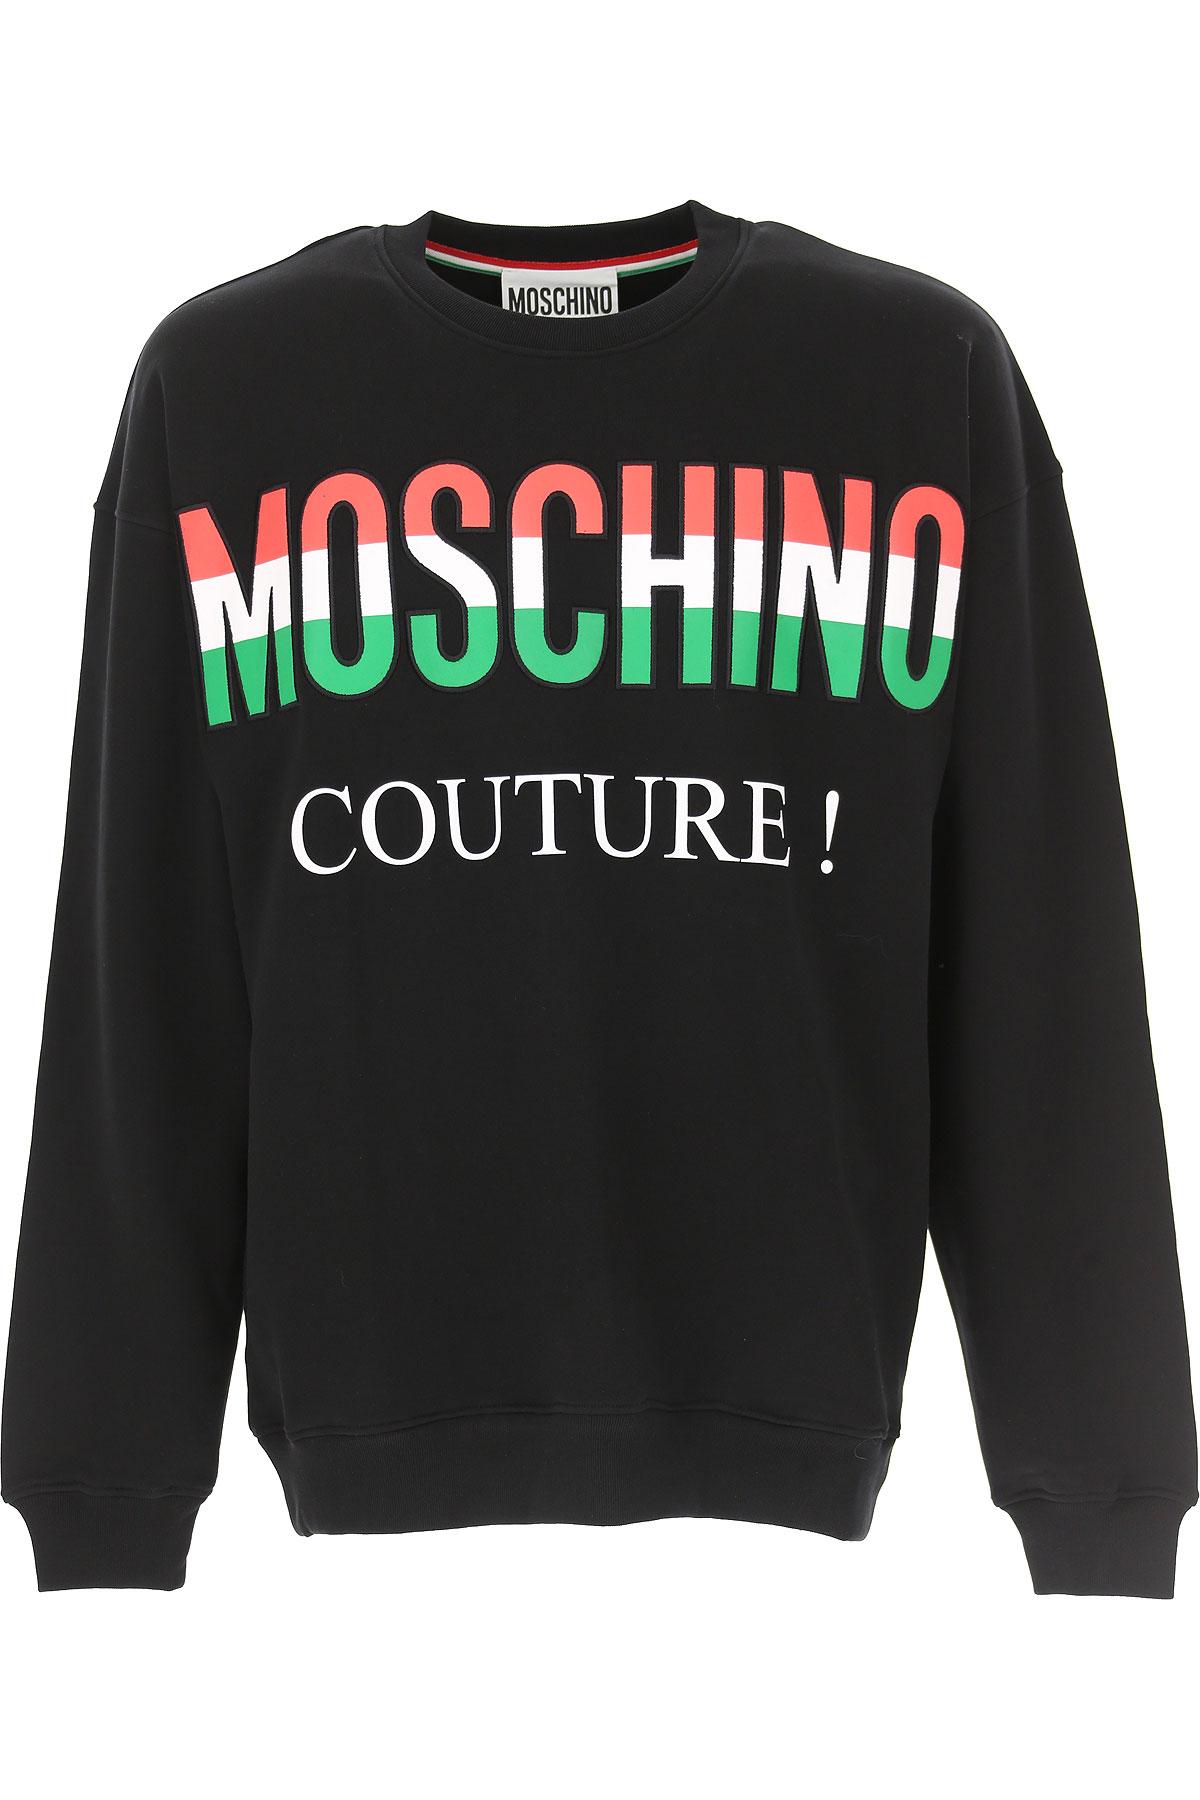 Moschino Cotton Couture Sweatshirt in Black for Men - Lyst